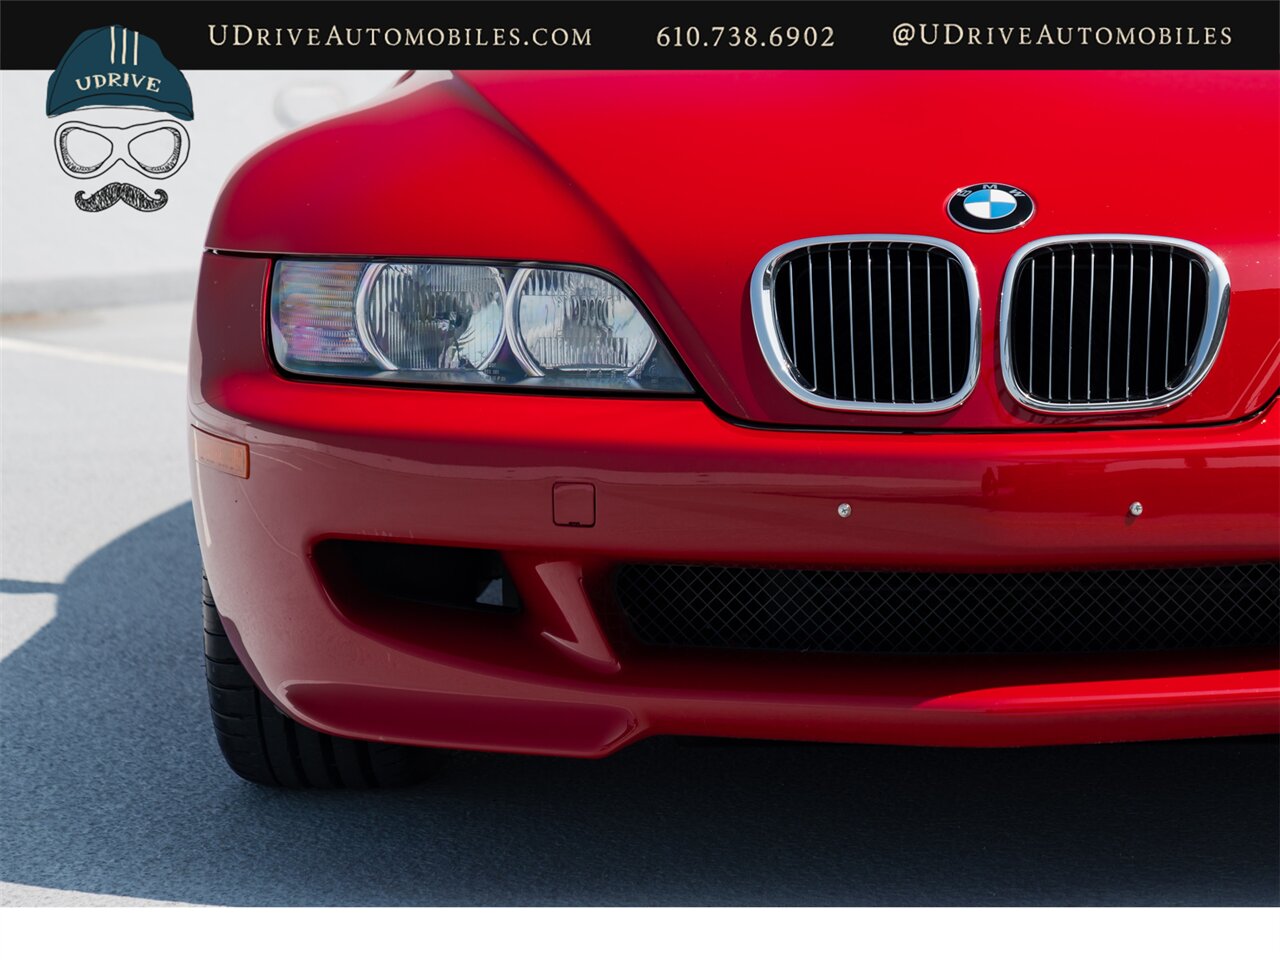 2000 BMW Z3 M  Coupe 25k Miles  Sunroof Delete $4k Recent Service - Photo 14 - West Chester, PA 19382